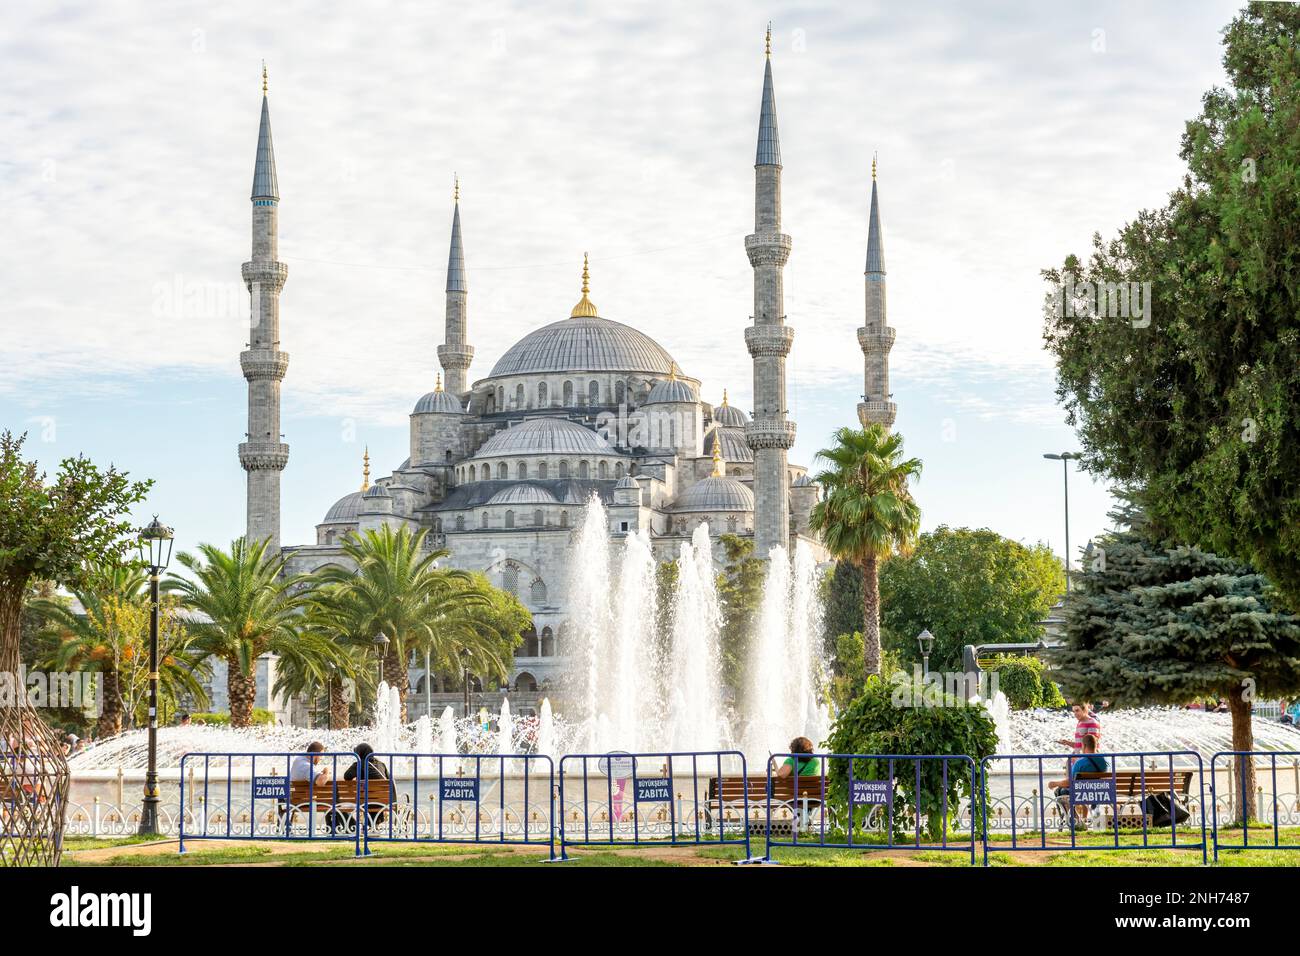 People sitting around the fountain at Sultanahmet Square, Sultan Ahmet Mosque can be seen at the background. Istanbul, Turkey (2013) Stock Photo